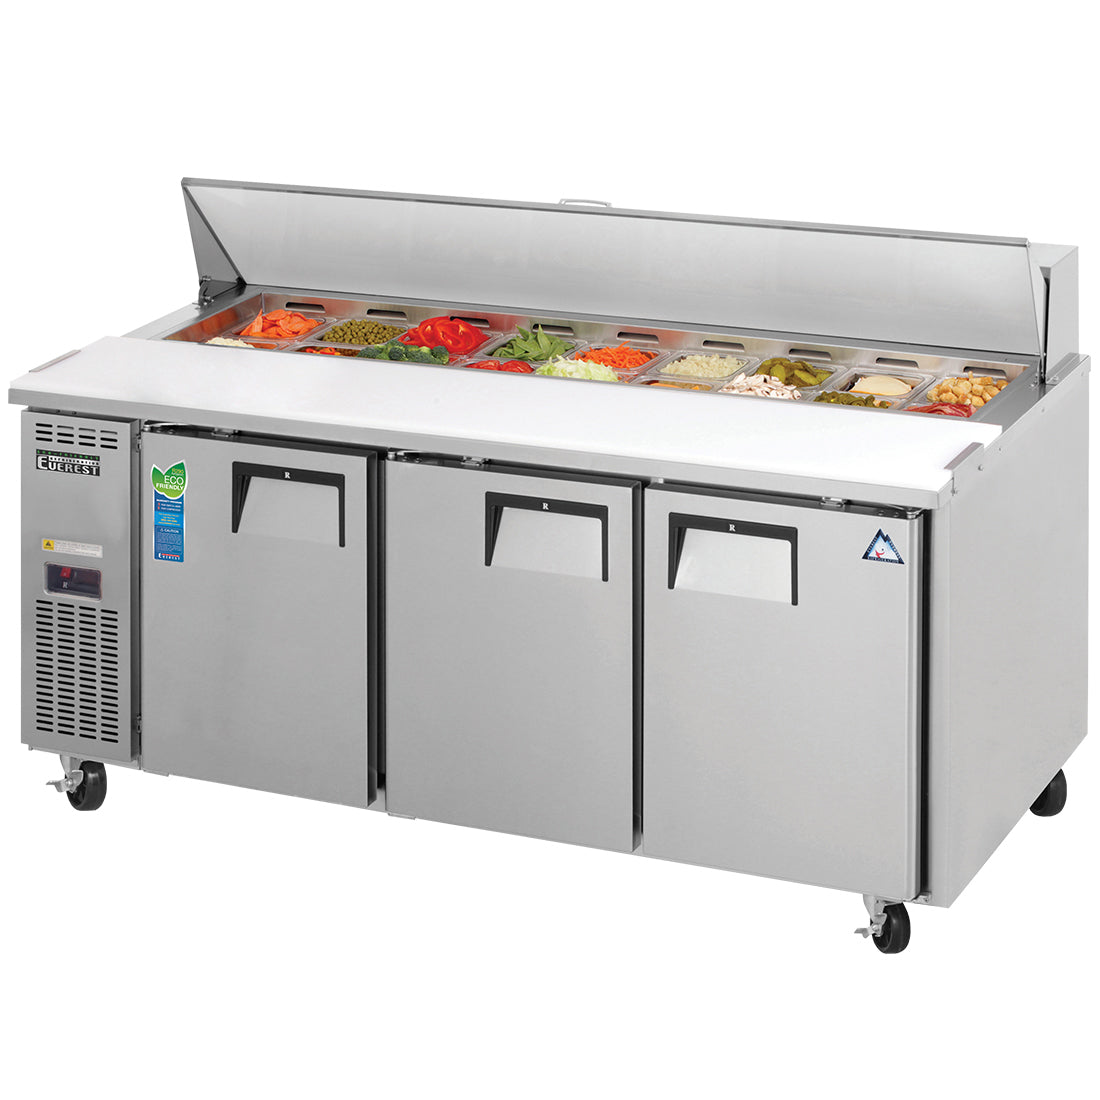 Everest EP Series-EPR3 Three Section Side Mount Sandwich Prep Table - 21 Cu. Ft.